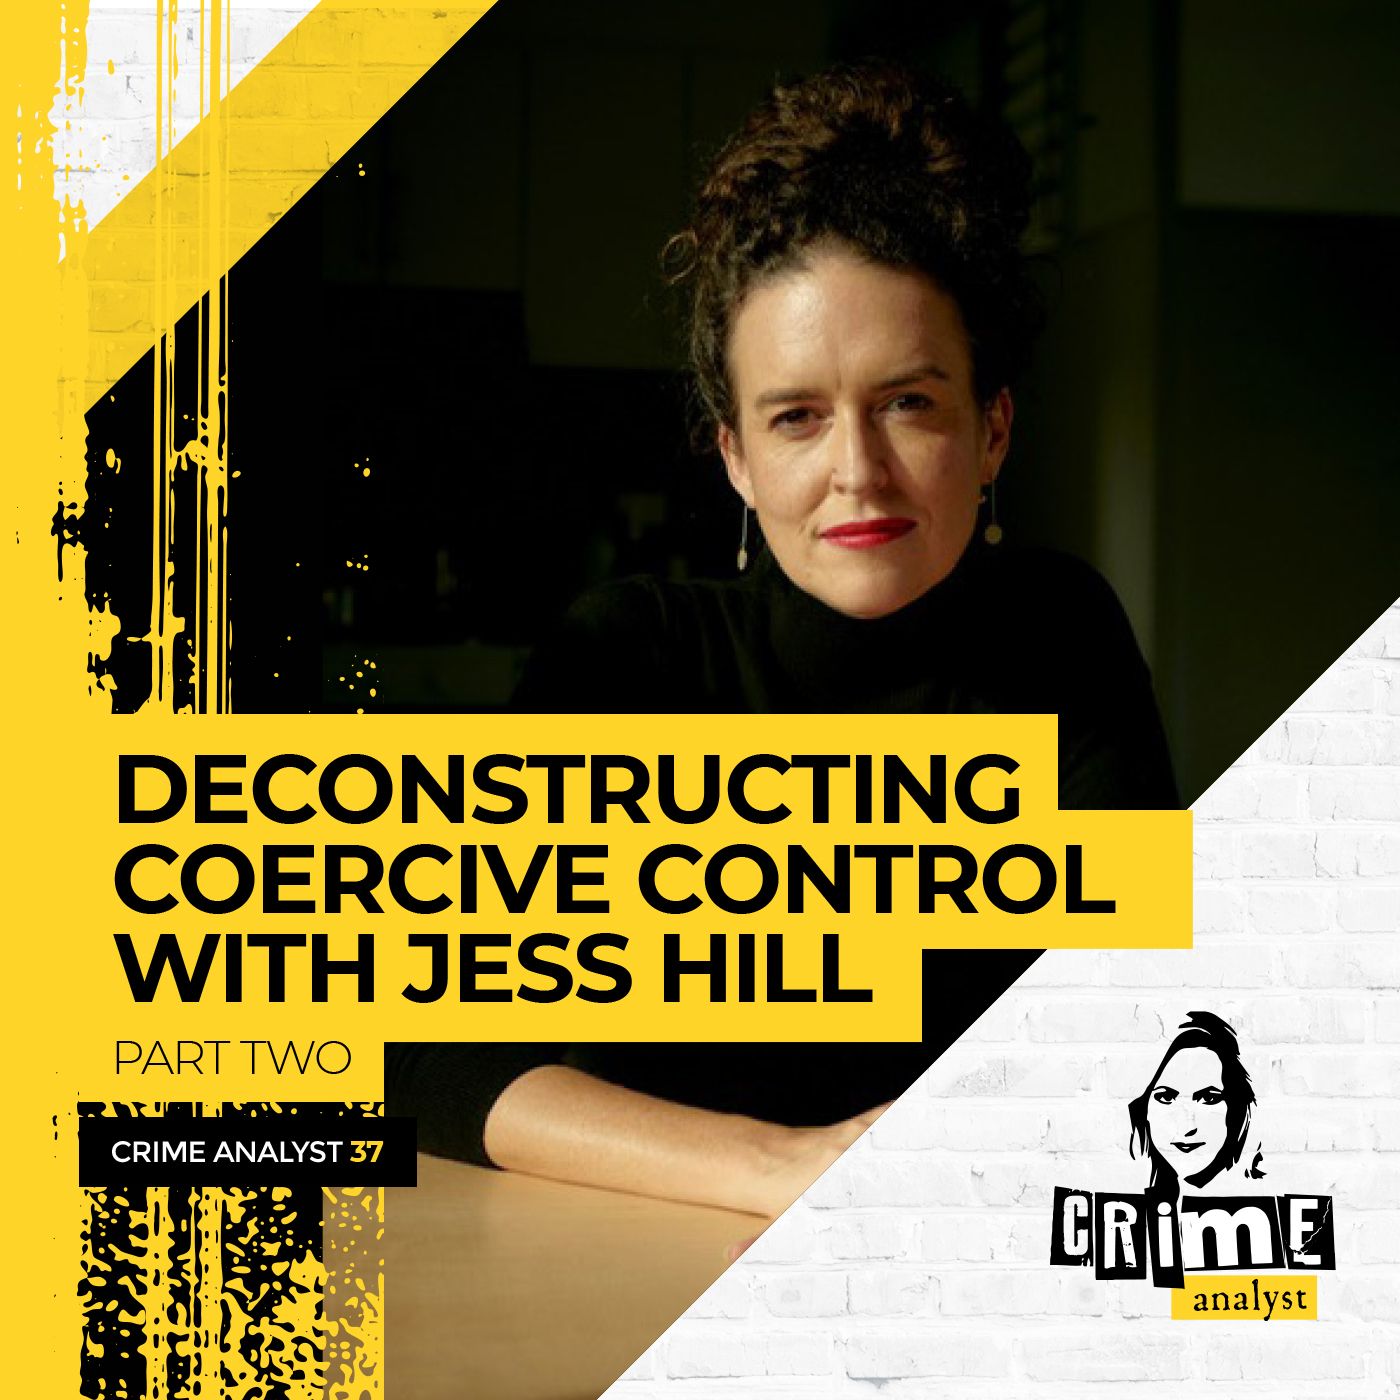 37: The Crime Analyst | Ep 37 | Deconstructing Coercive Control with Jess Hill, Part 2 Image